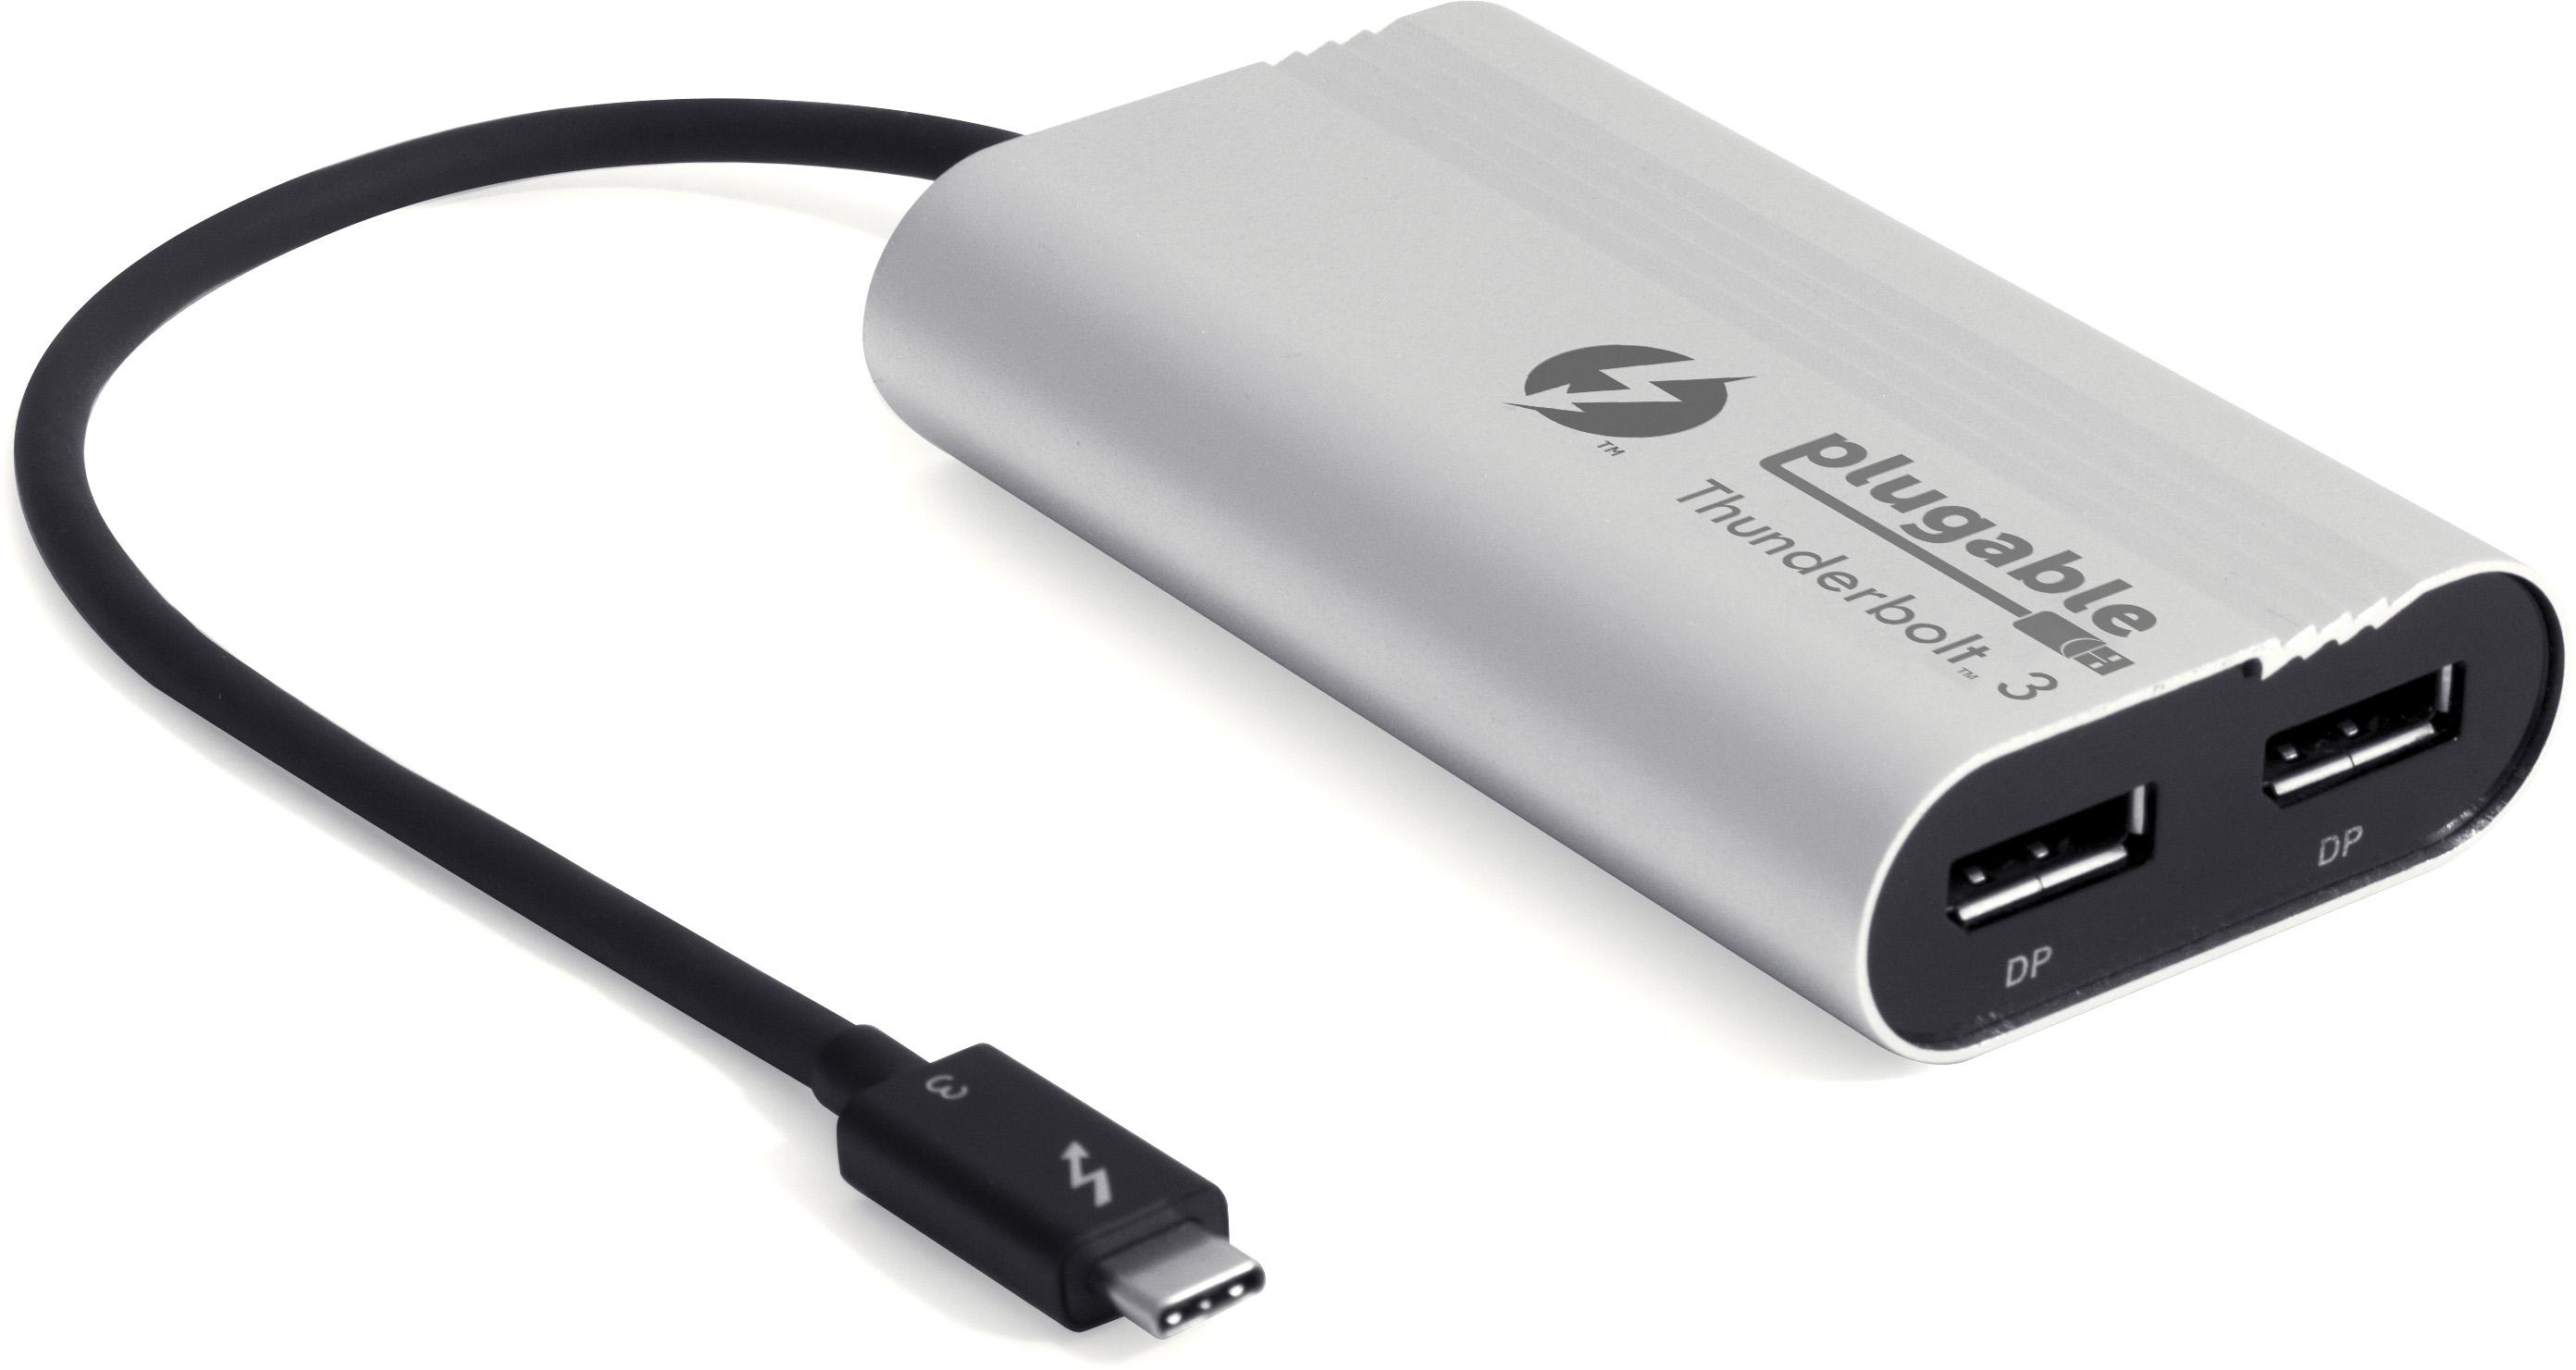 Plugable Thunderbolt 3 to Dual DisplayPort Display Adapter Compatible with MacBook Pro Systems (2019\2018\2017), Project or Stream to up to 2x 4K 60Hz Monitors Or 1x 5K (Thunderbolt 3 Certified) - image 1 of 7